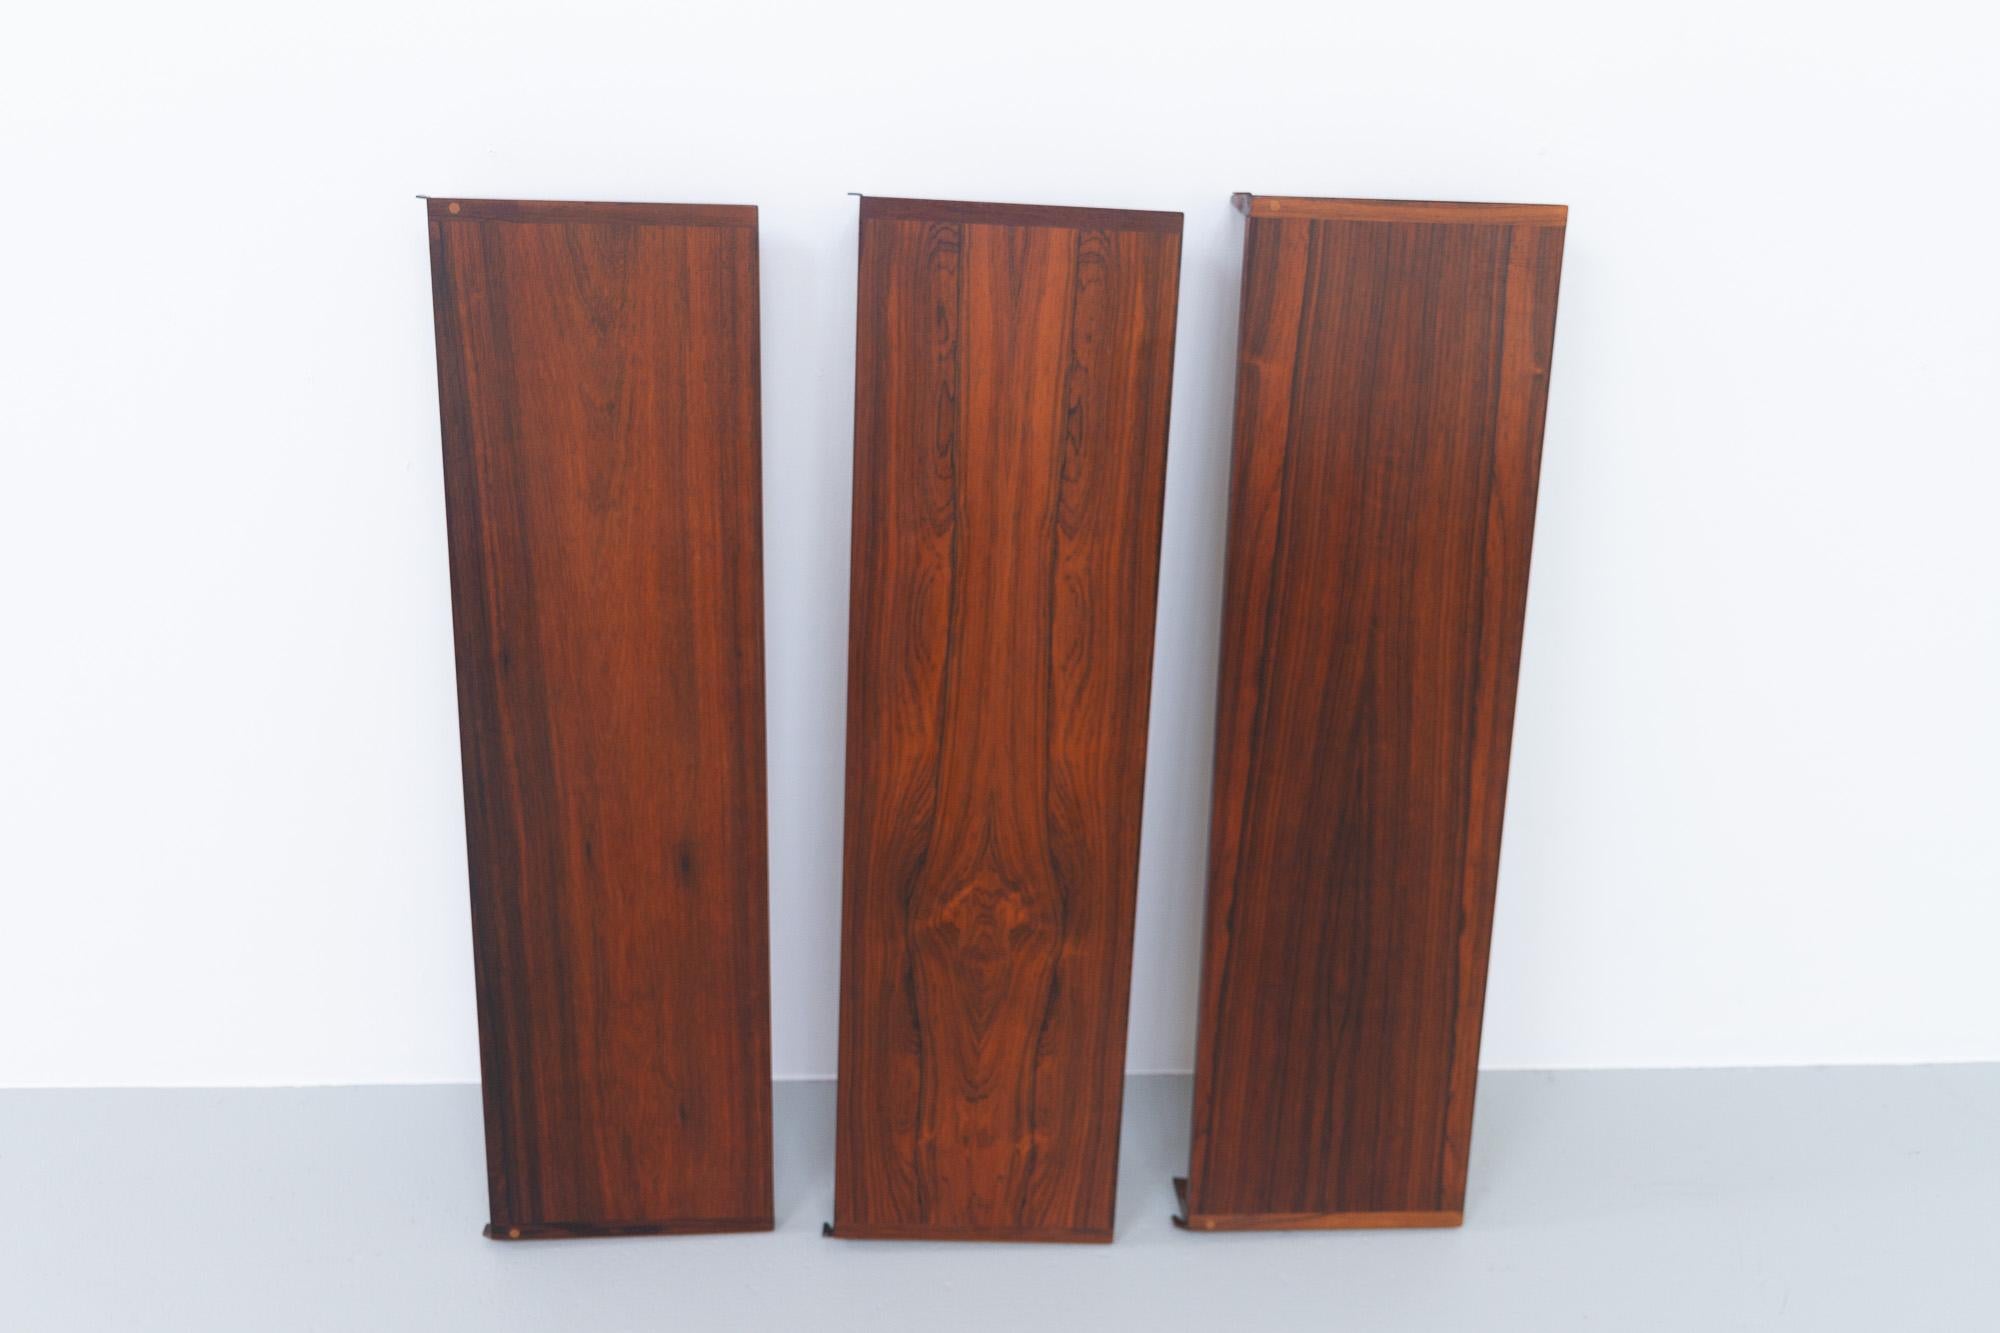 Vintage Danish Rosewood Wall Unit by Kai Kristiansen for FM, 1960s For Sale 9